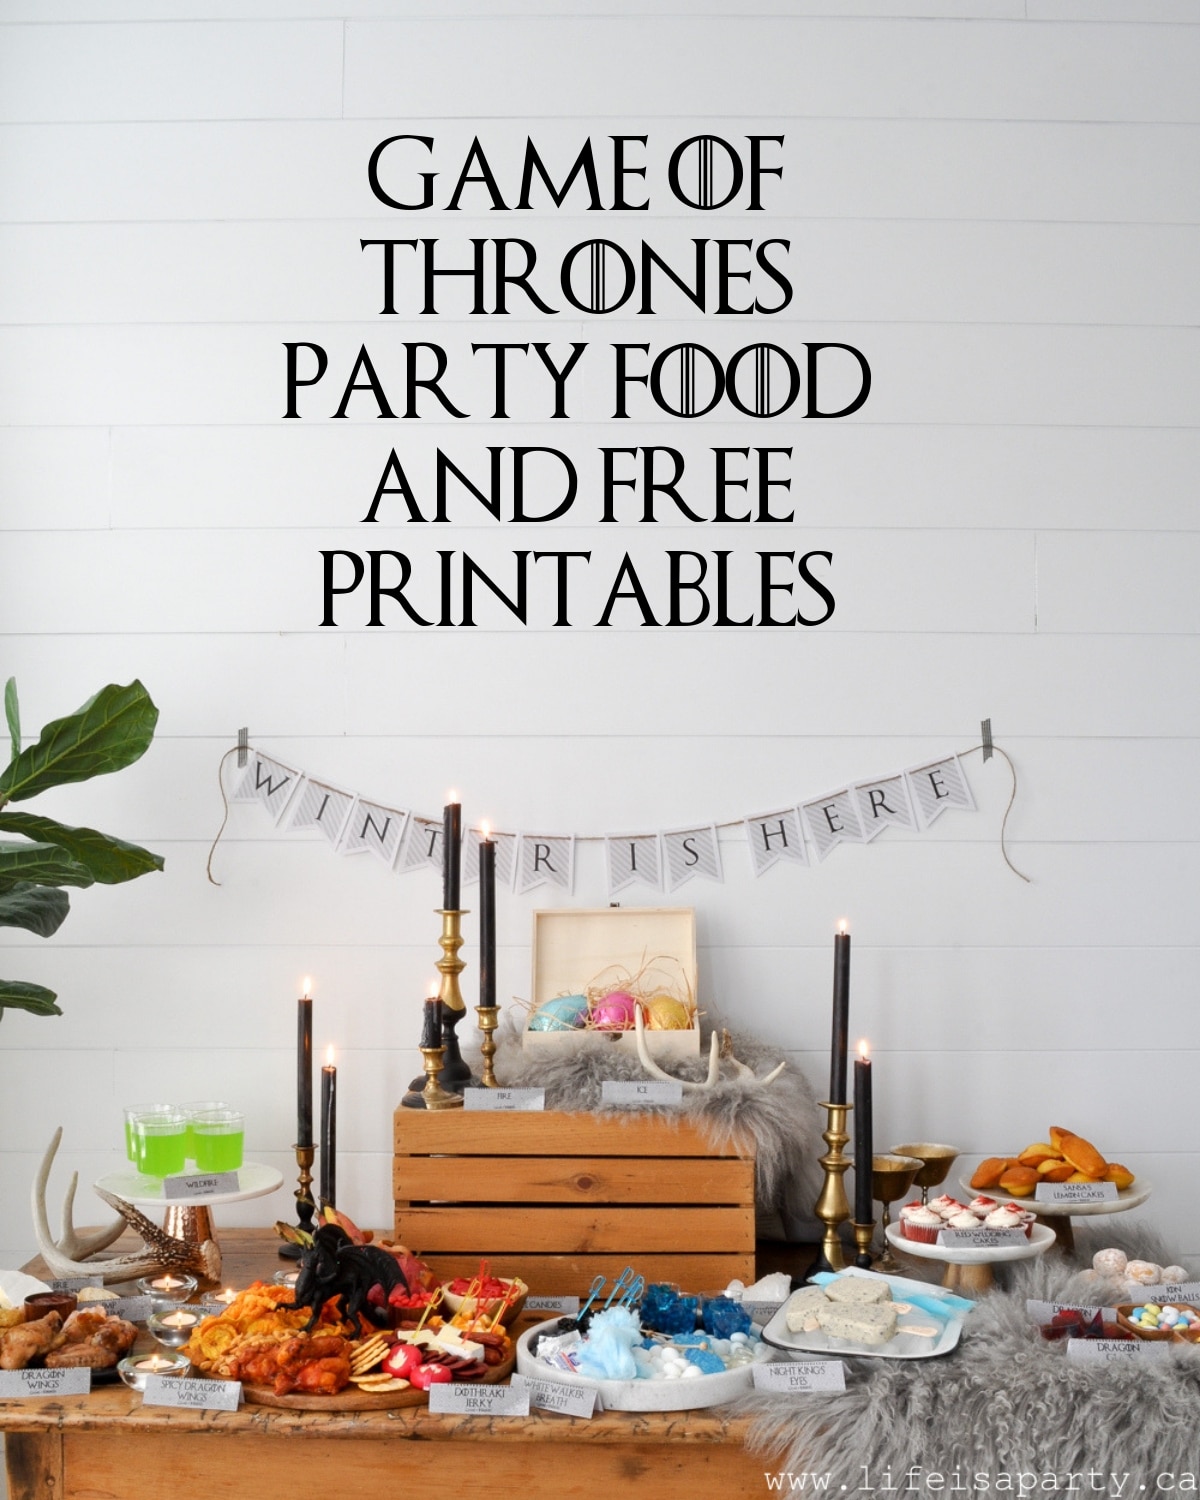 Game of Thrones Party Food and Free Printables: Fire and Ice Snack Board, themed food with printable labels and "Winter Is Here" Banner.